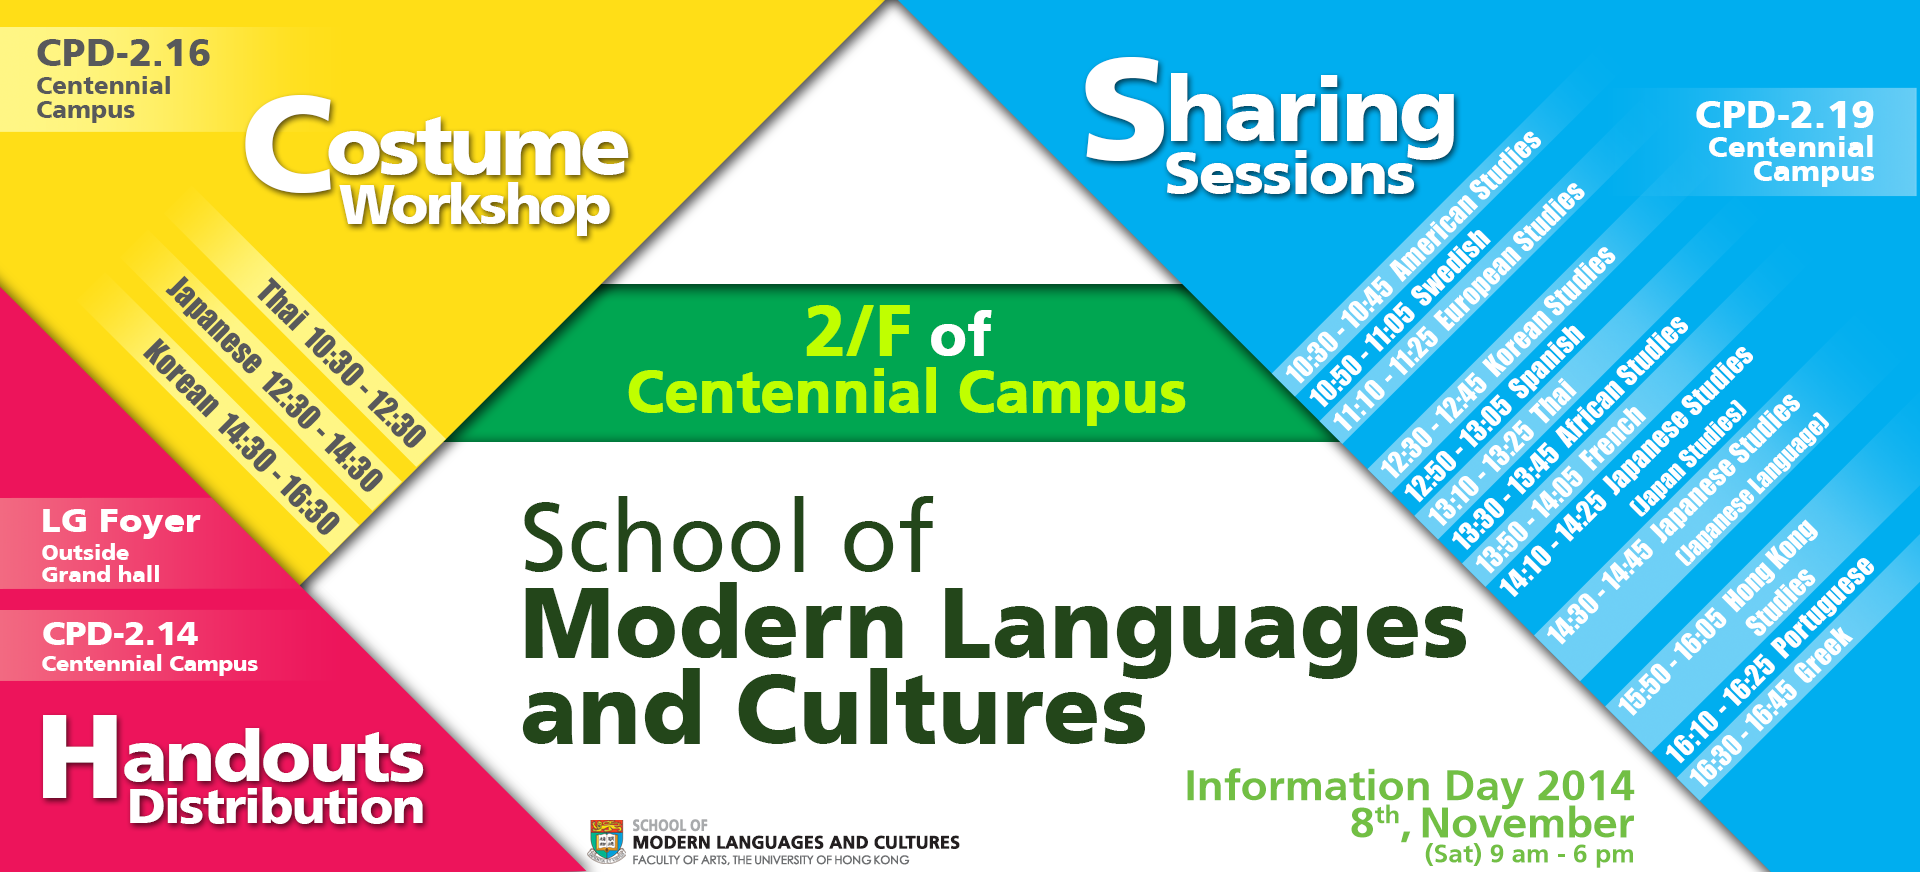 School of Modern Languages and Cultures, Information Day